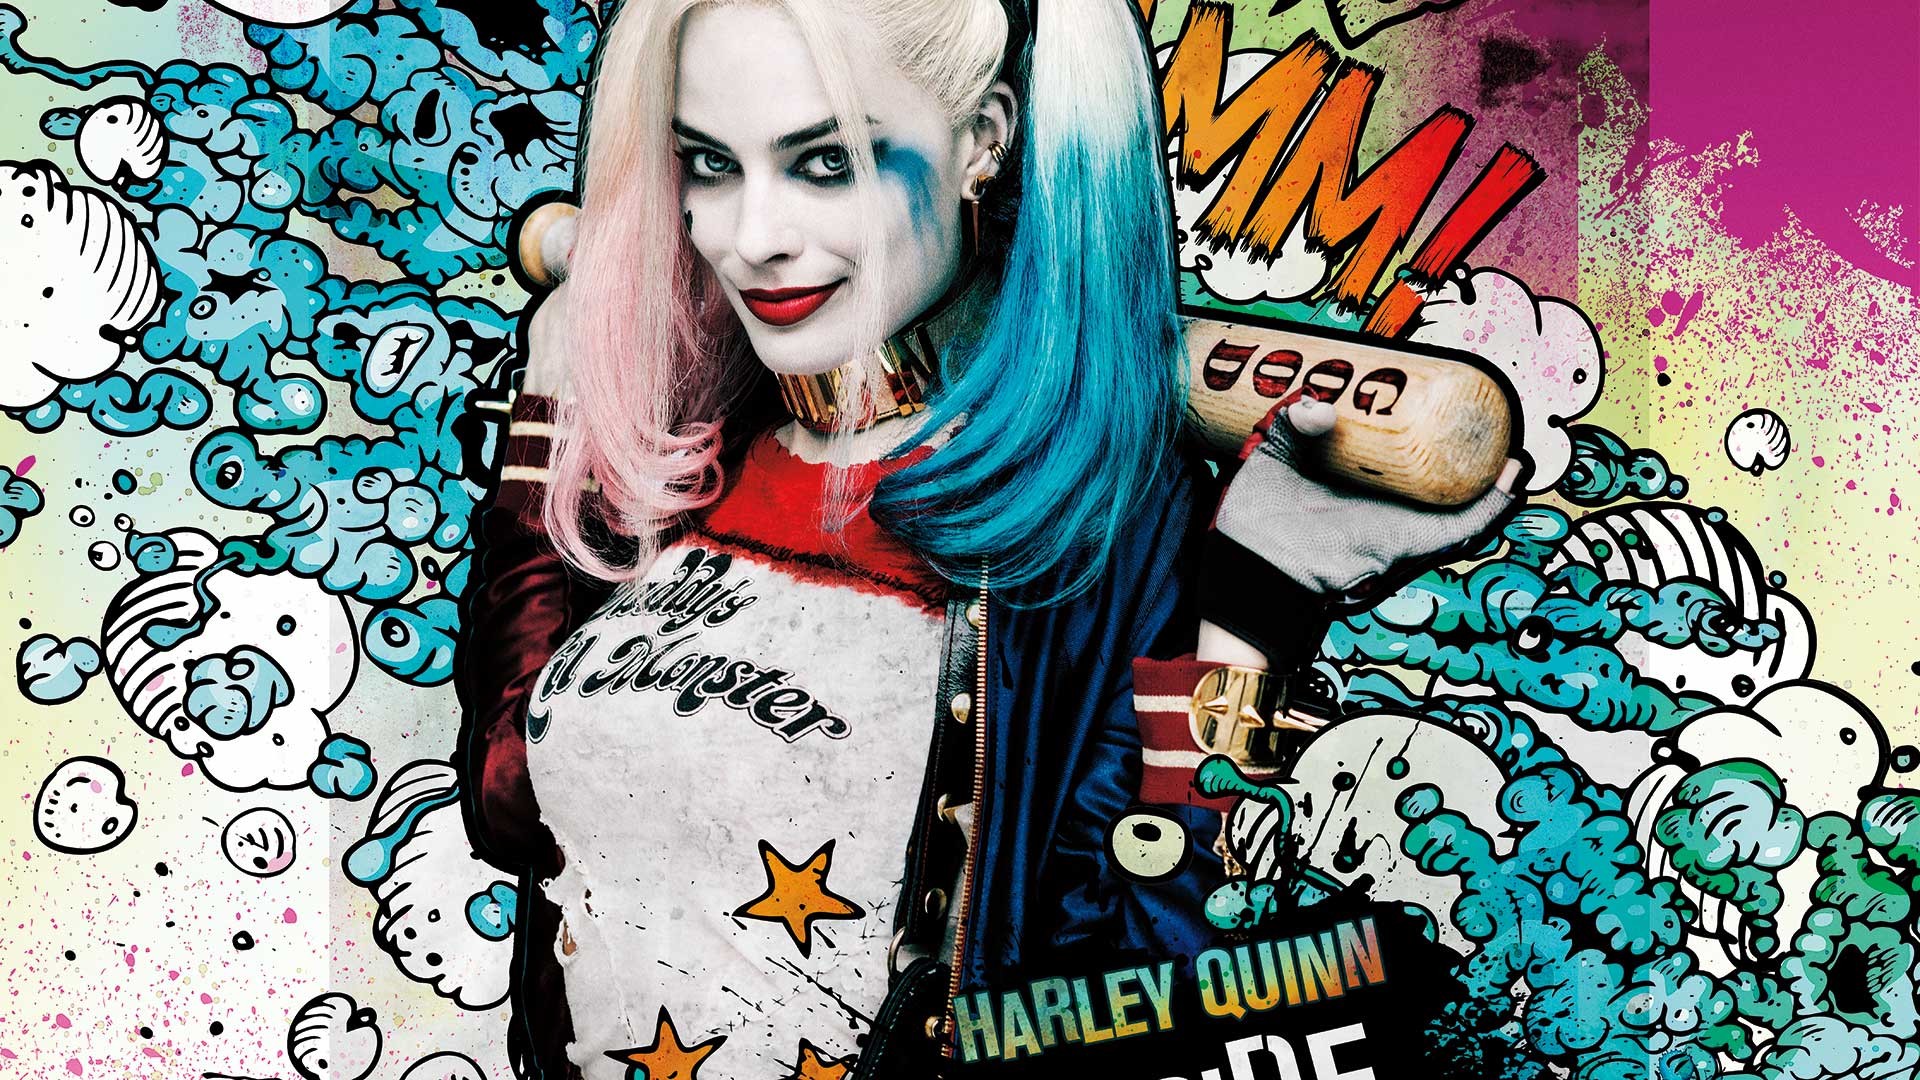 Harley Quinn HD Backgrounds with image resolution 1920x1080 pixel. You can make this wallpaper for your Desktop Computer Backgrounds, Mac Wallpapers, Android Lock screen or iPhone Screensavers